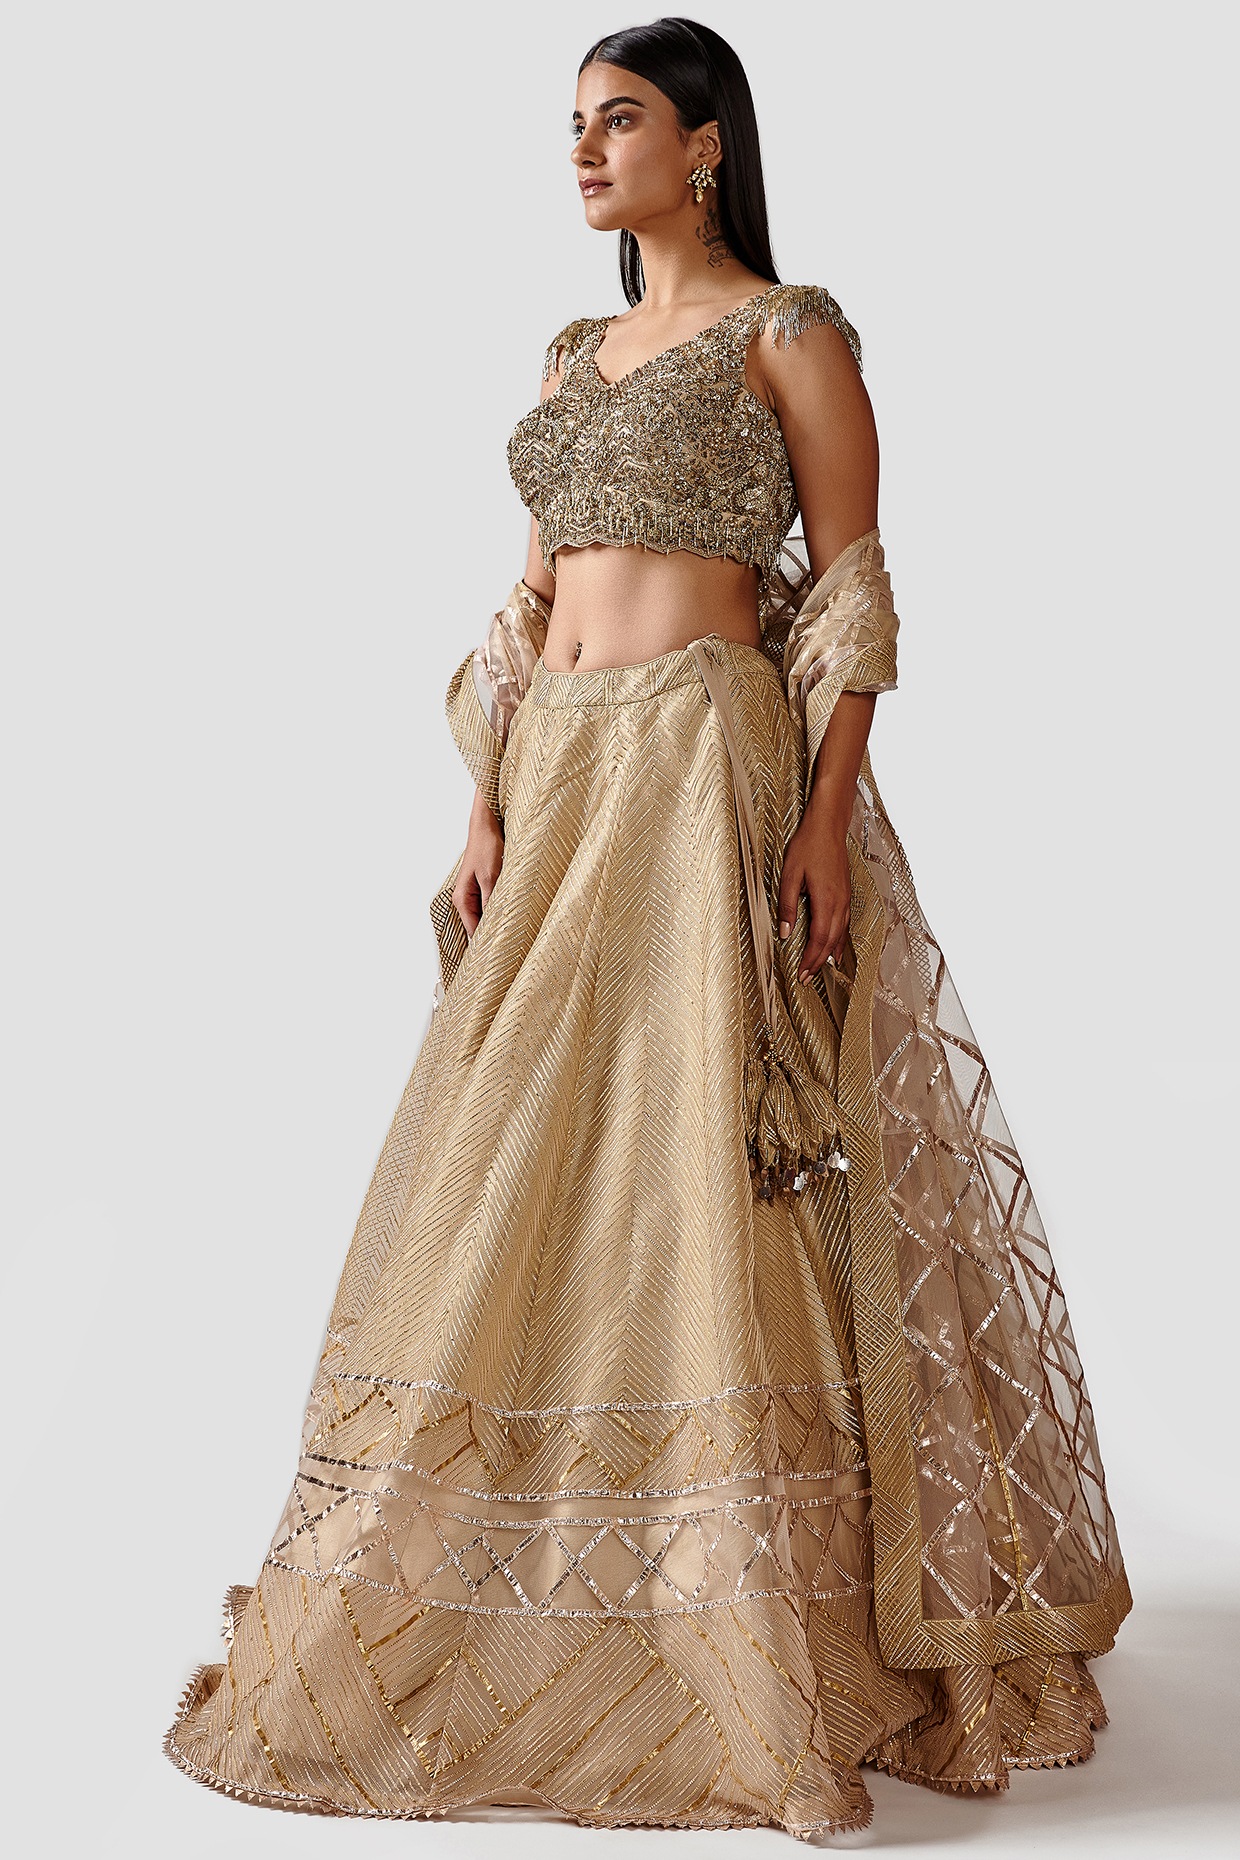 Have A Look At Our Newest Golden Bridal Lehenga Collection